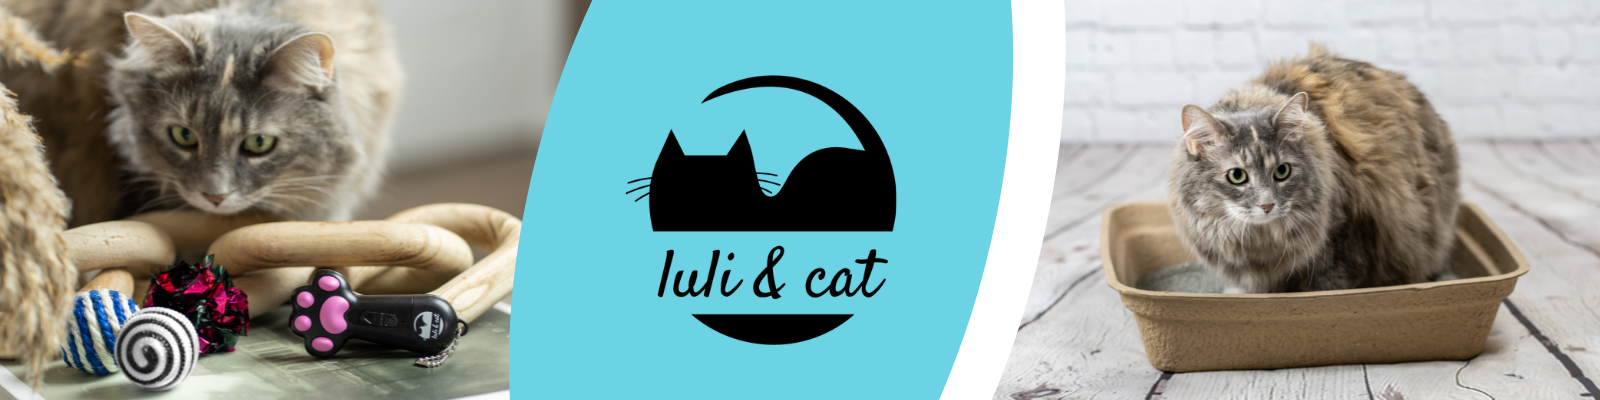 Receive a Donation From Luli & Cat